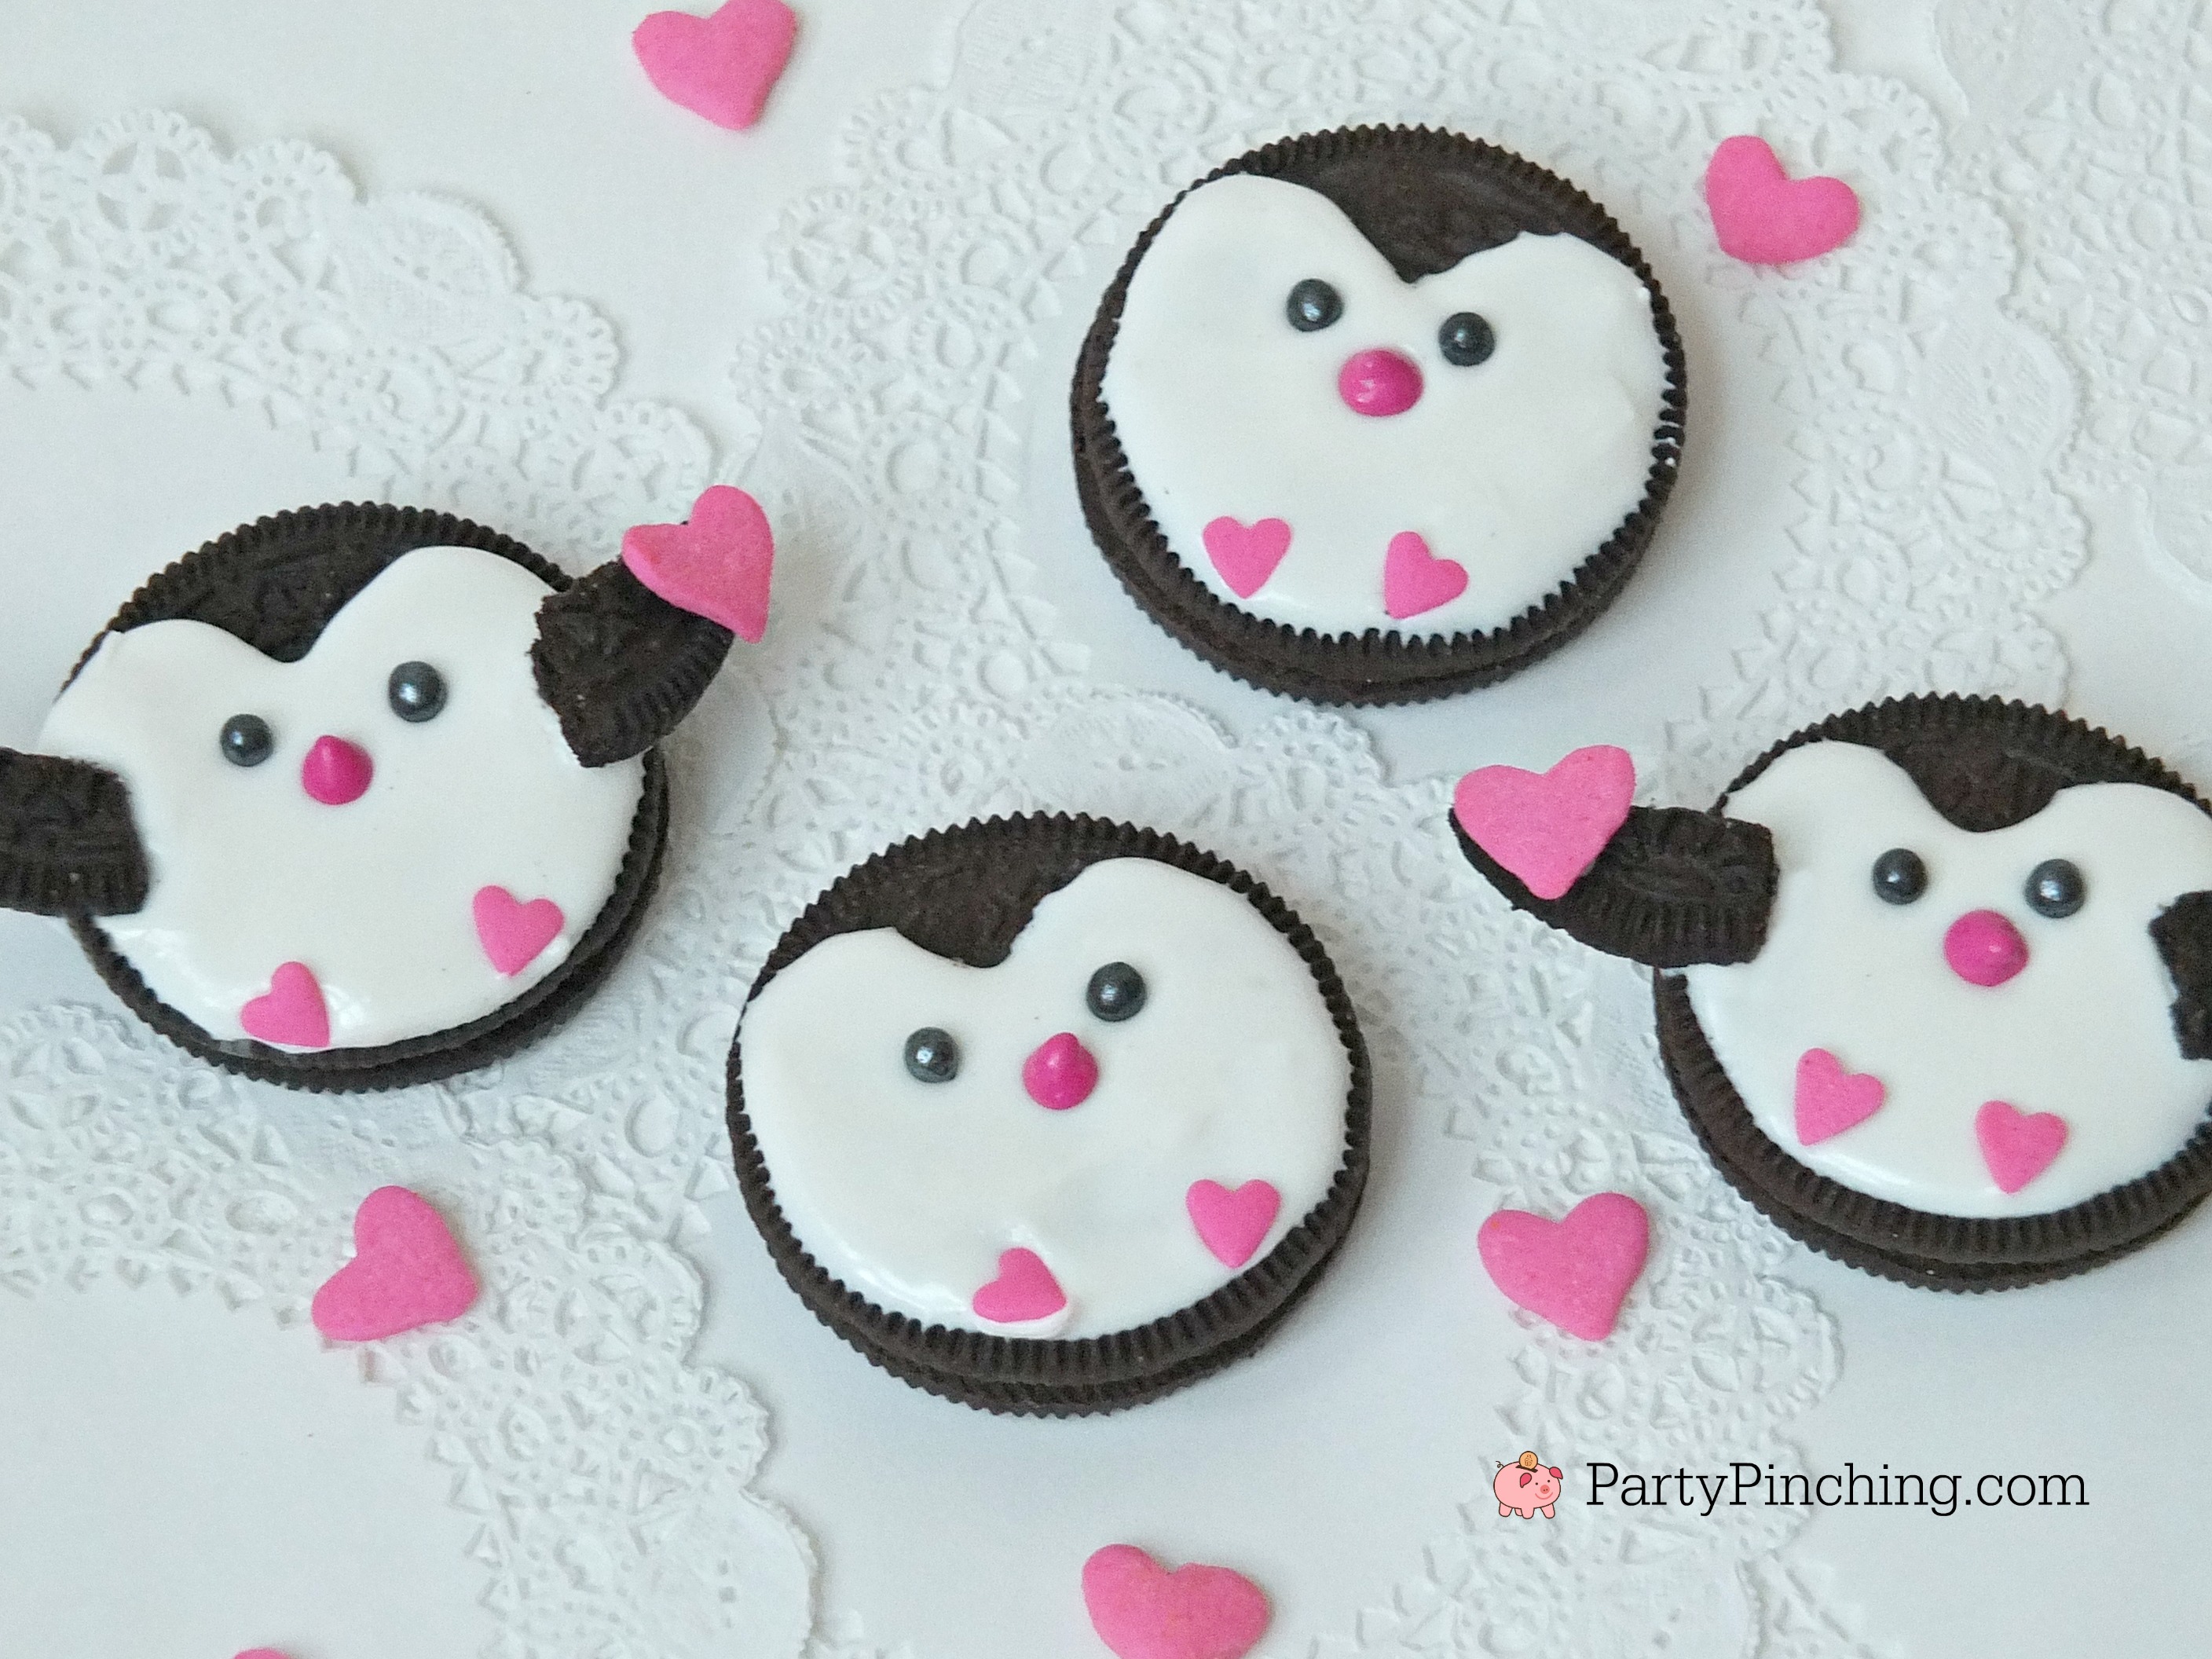 Penguin Oreo Cookies, cute Valentine's Day cookies, Oreo Penguin cookies, easy Valentine cookie ideas for kids, sweet treats for Valentine's day party class party food, fun food penguins